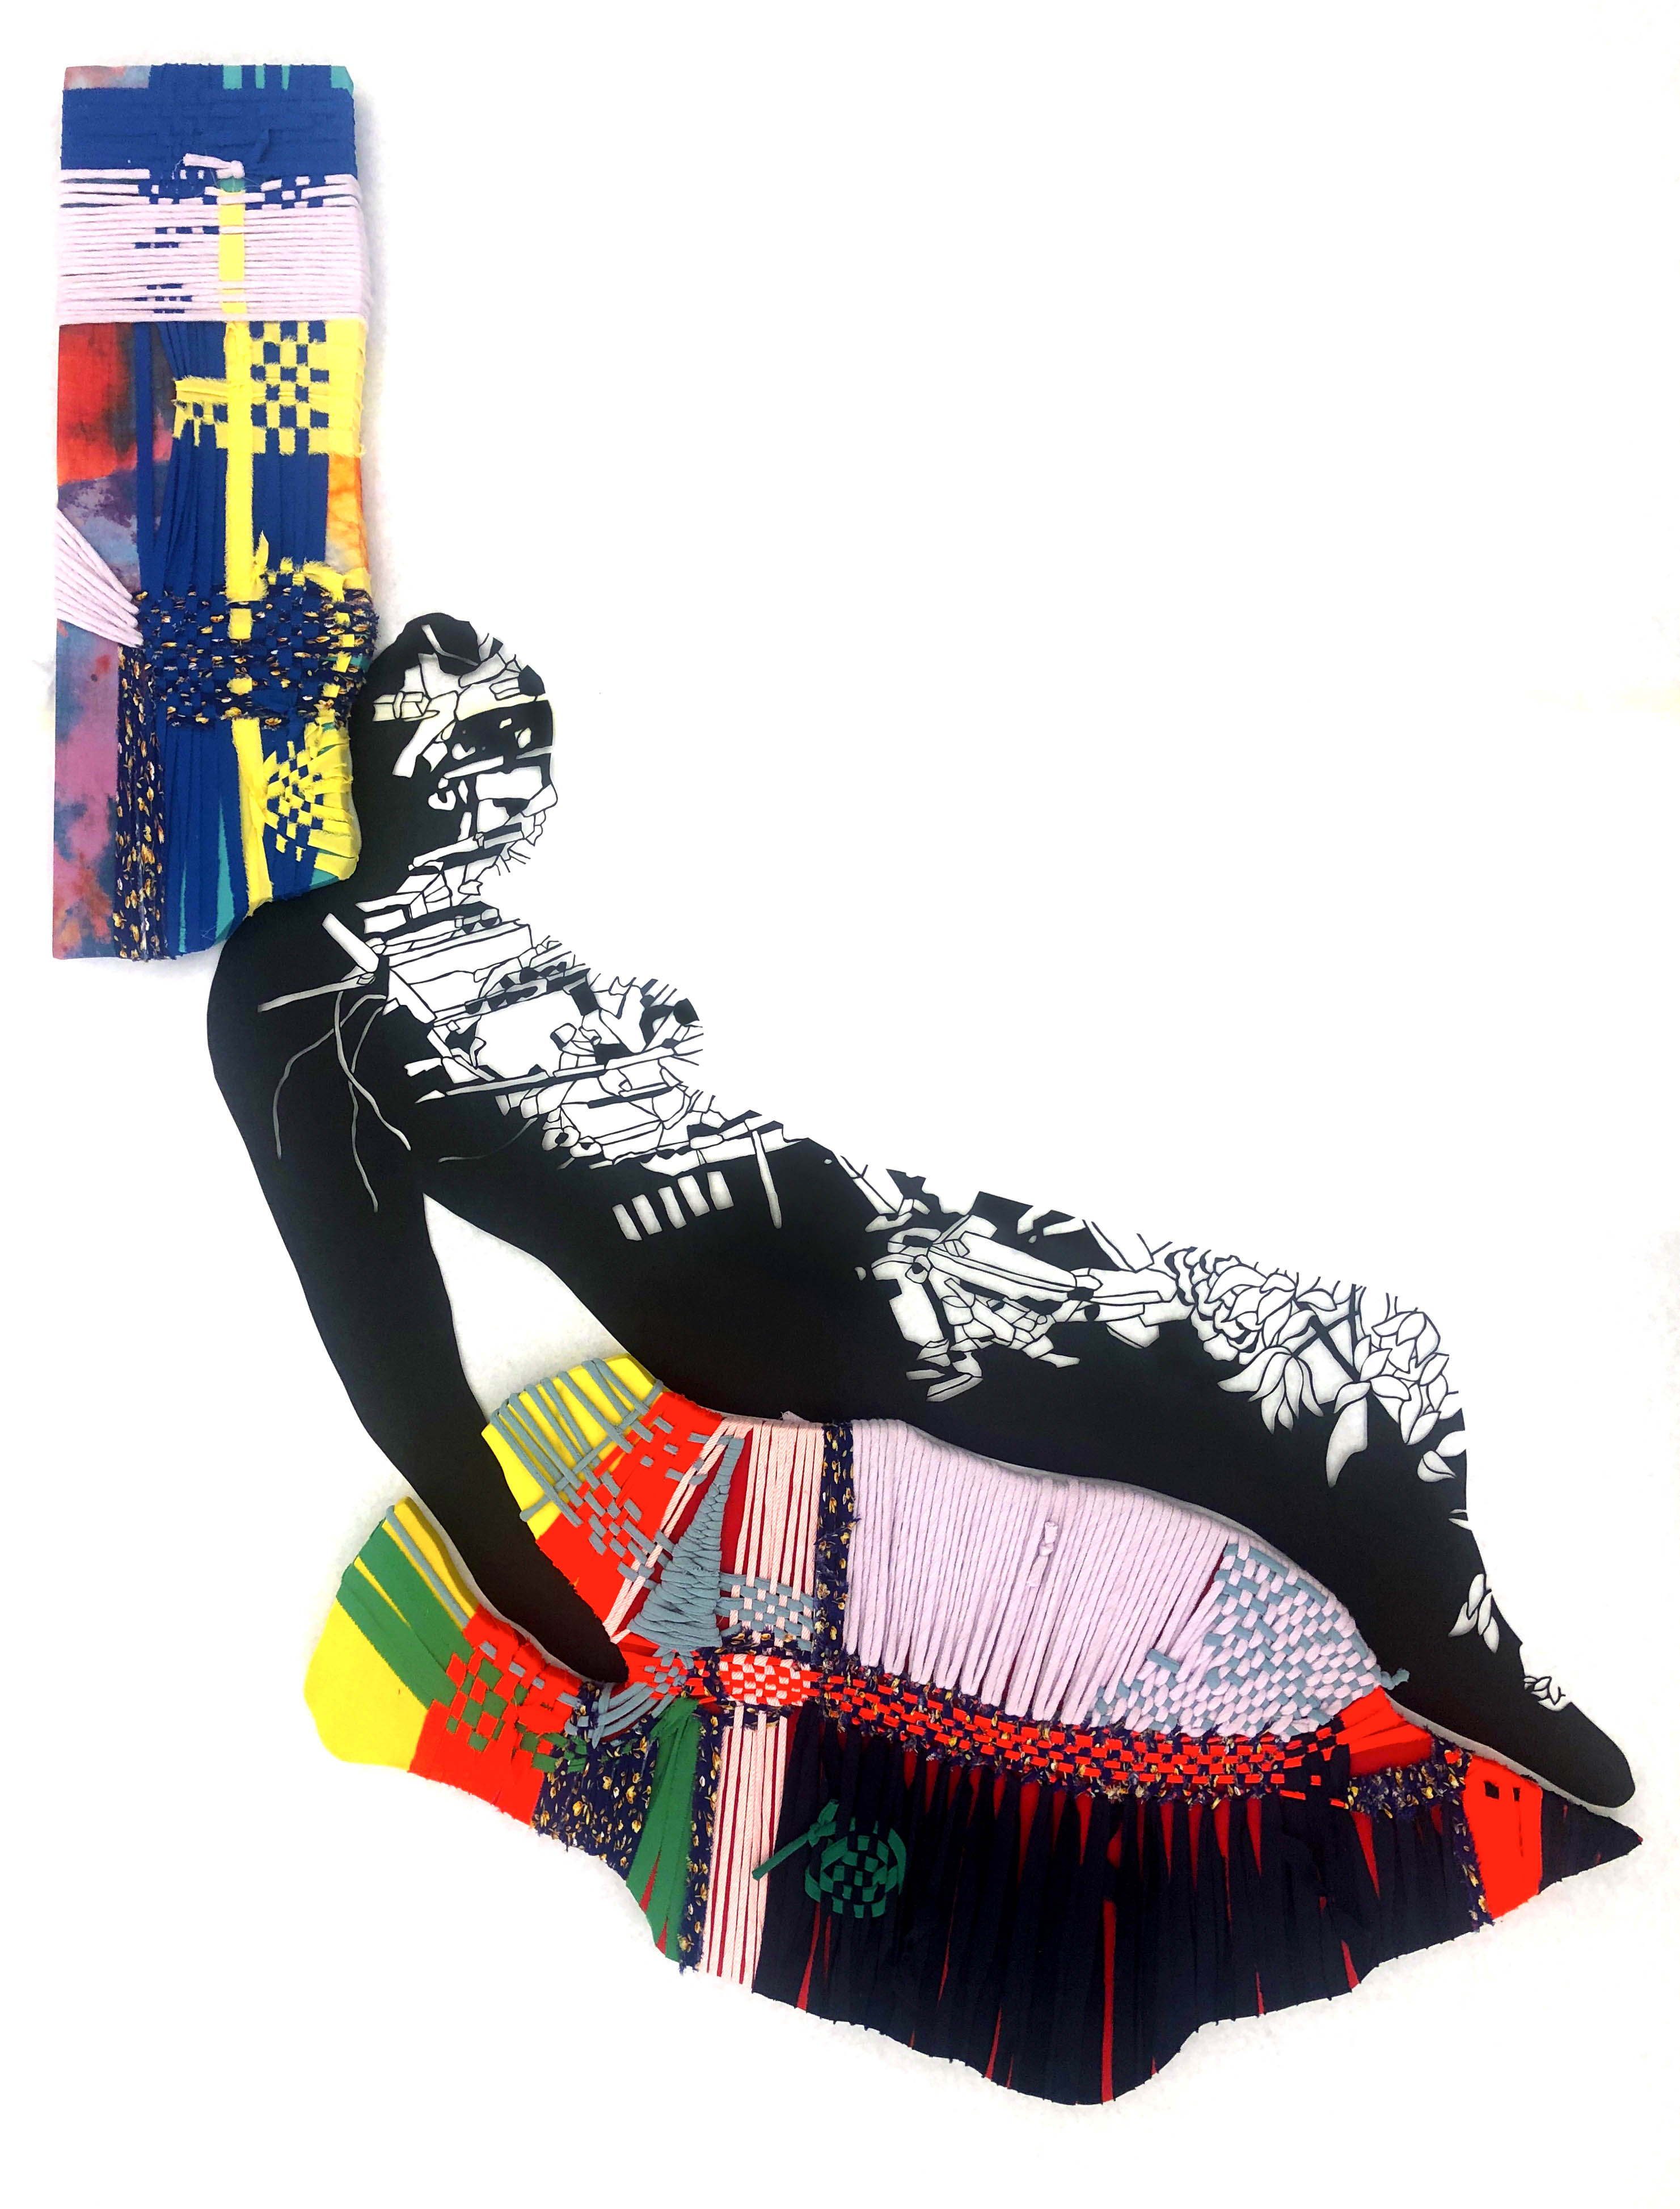 Not a place to rest, 2022, manual paper-cutting, hand woven textile, 47 1/4 x 37 1/8 inches